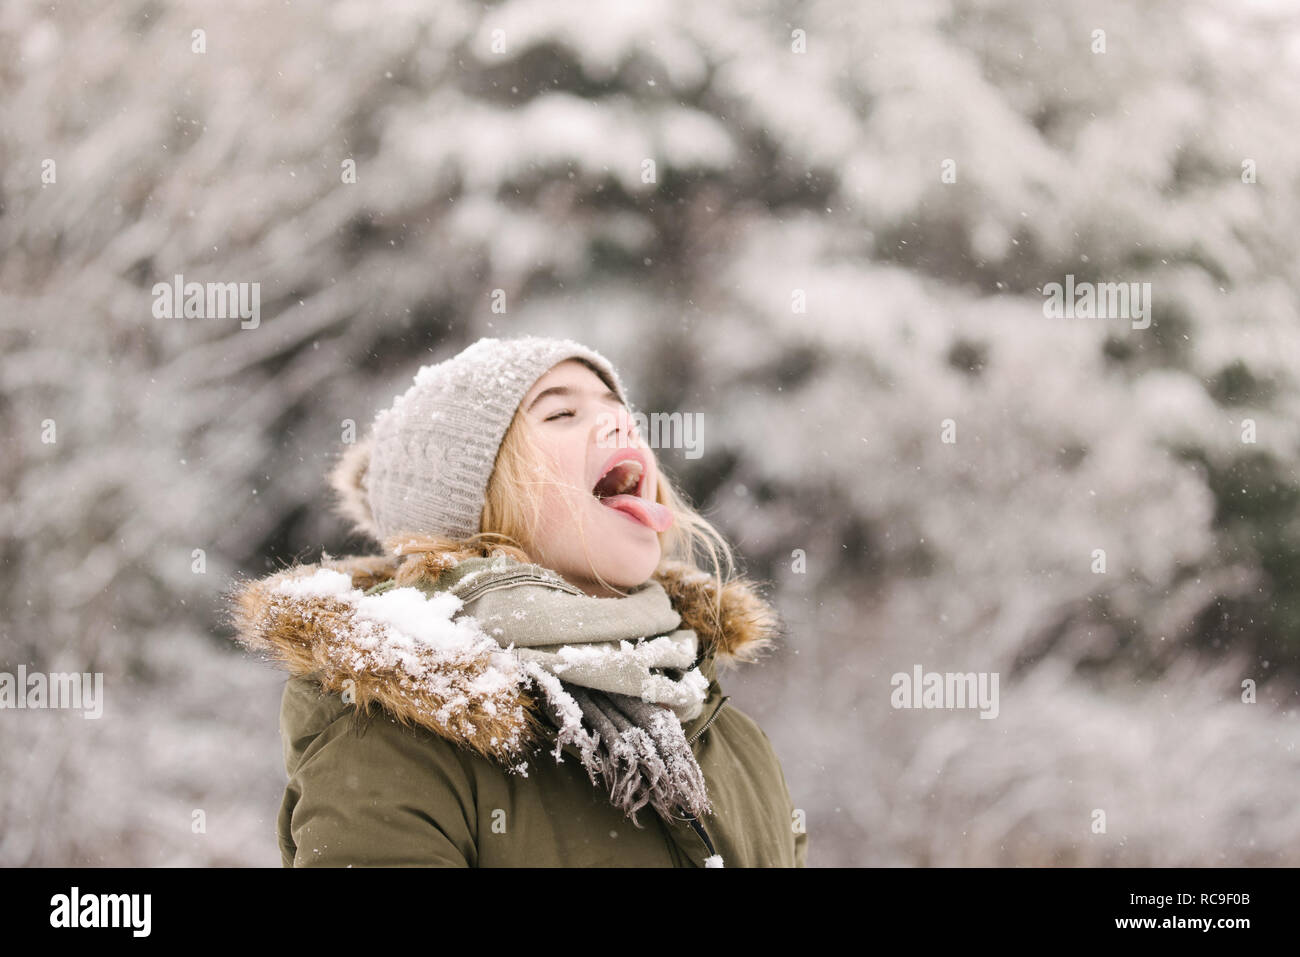 Girl with mouth open waiting for snow Stock Photo